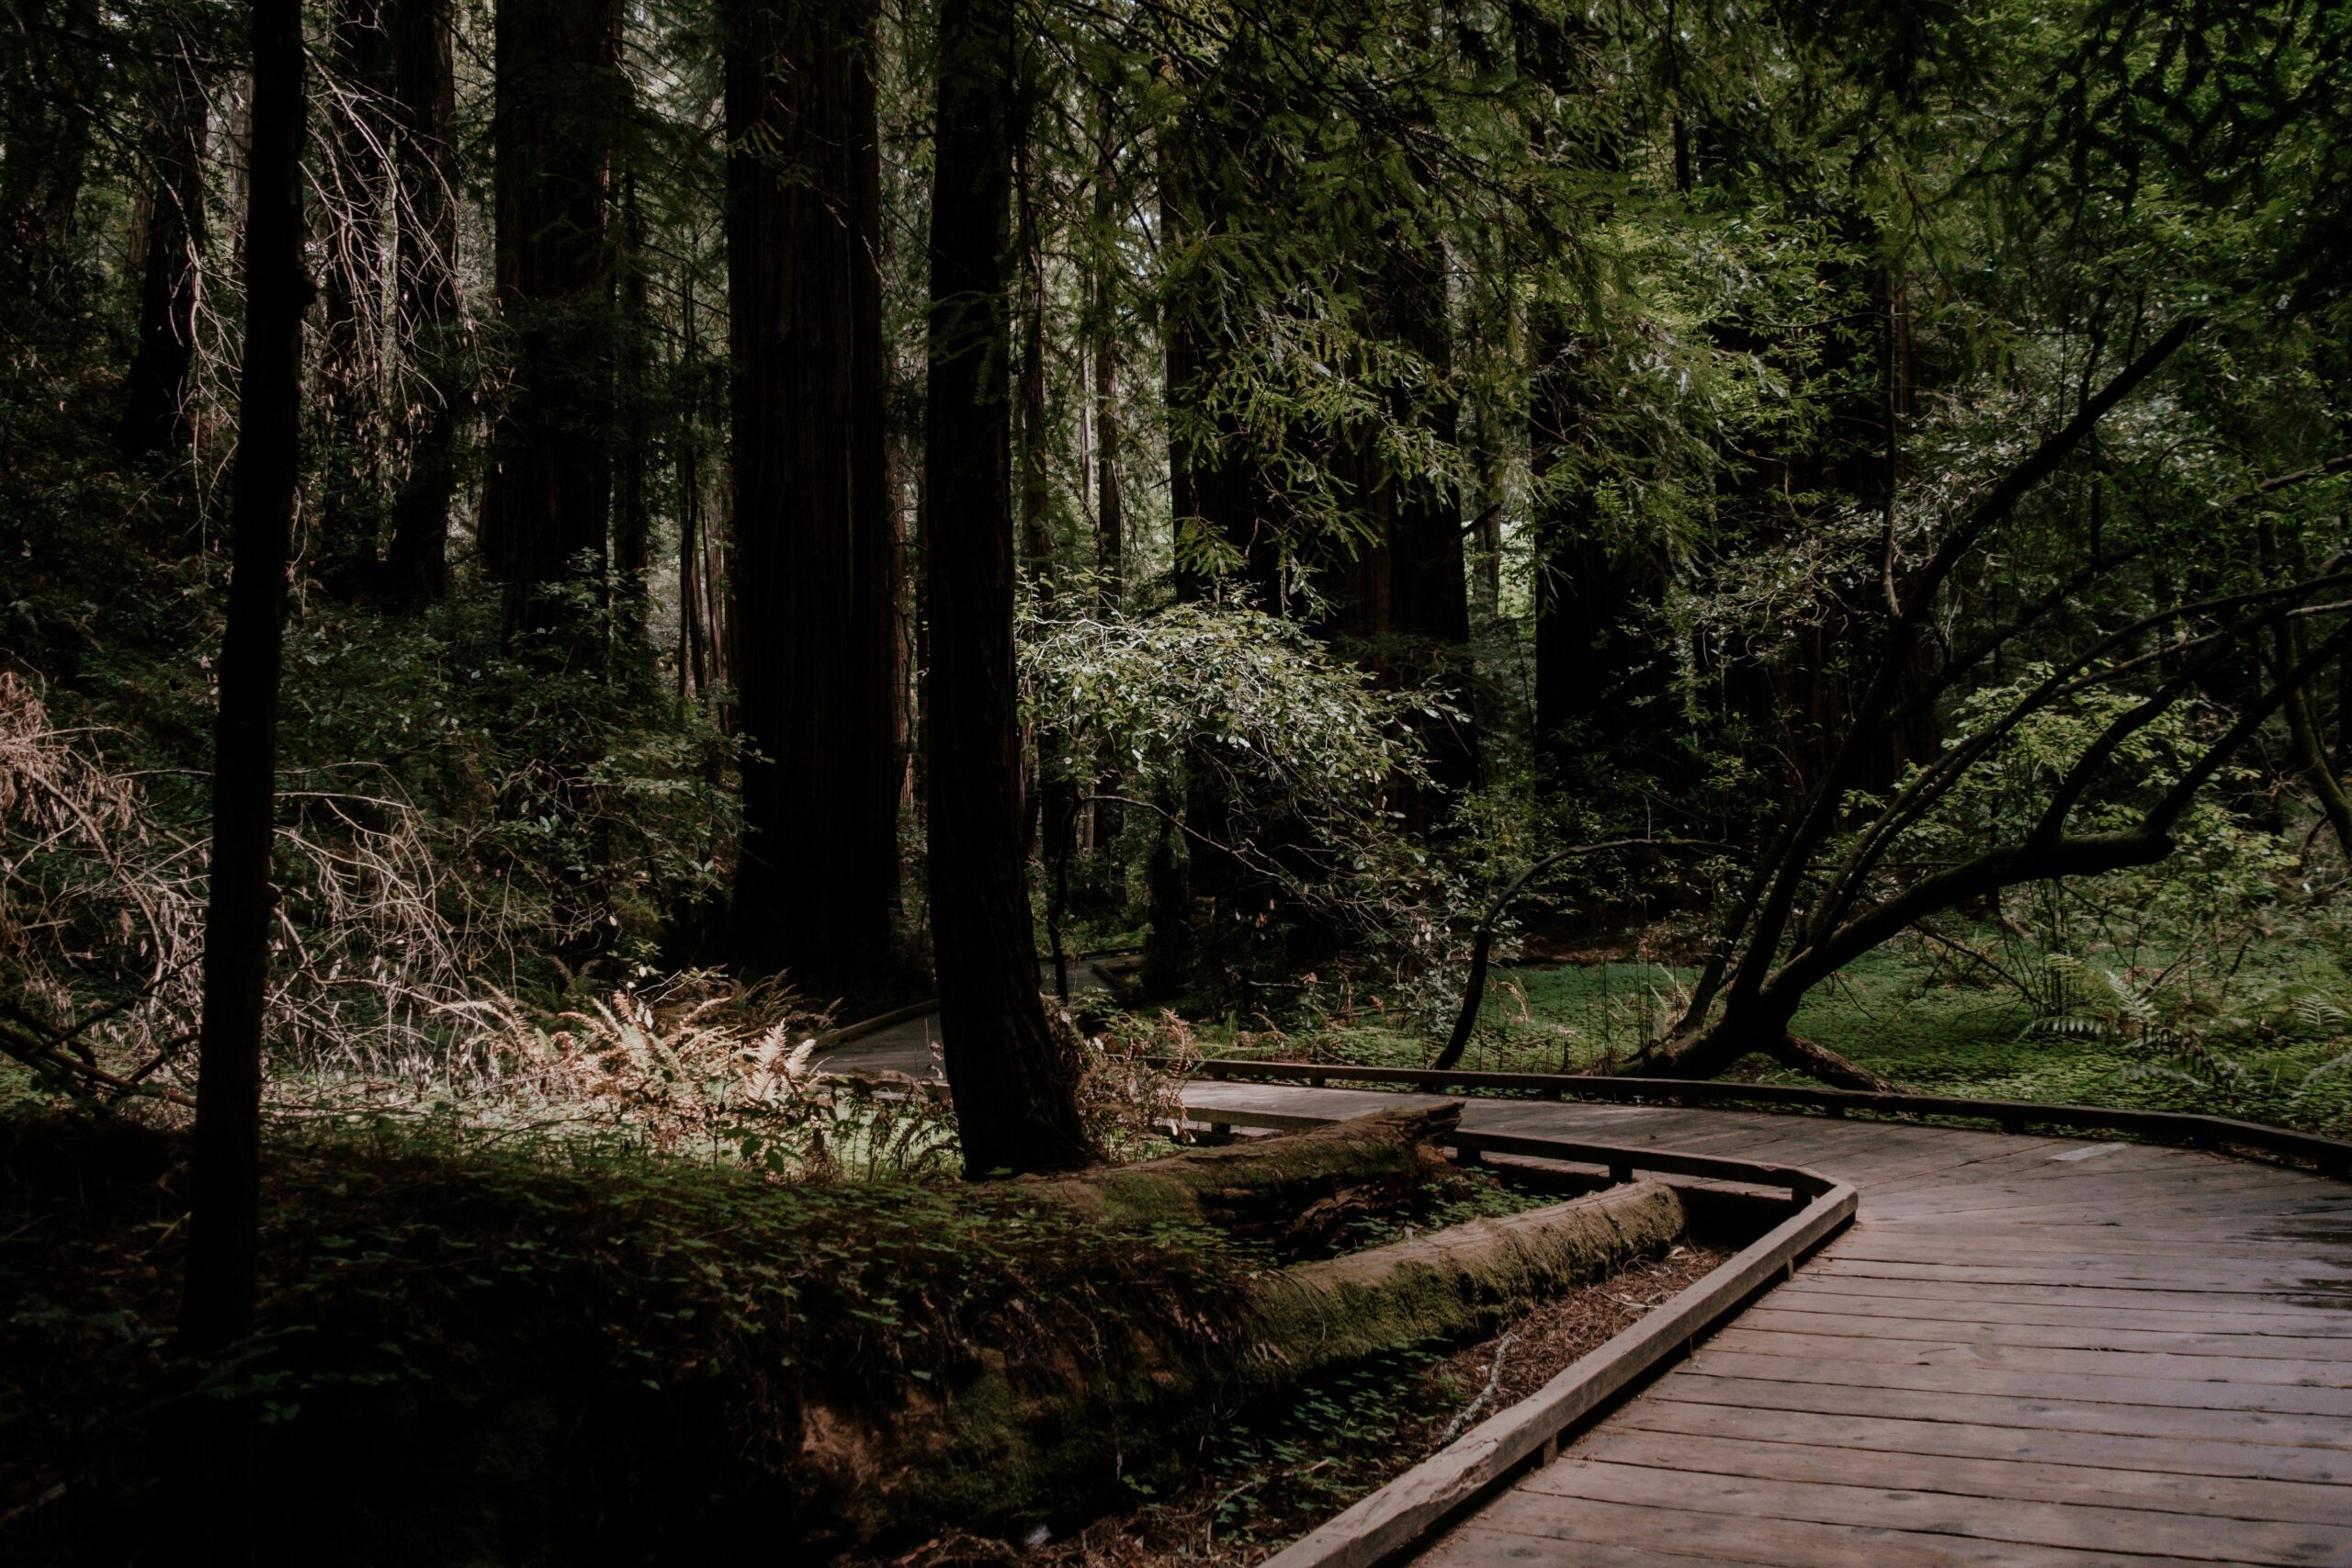 A wooden boardwalk meanders through the serene and shadowy undergrowth of a dense redwood forest, providing a peaceful path amidst the towering ancient trees.